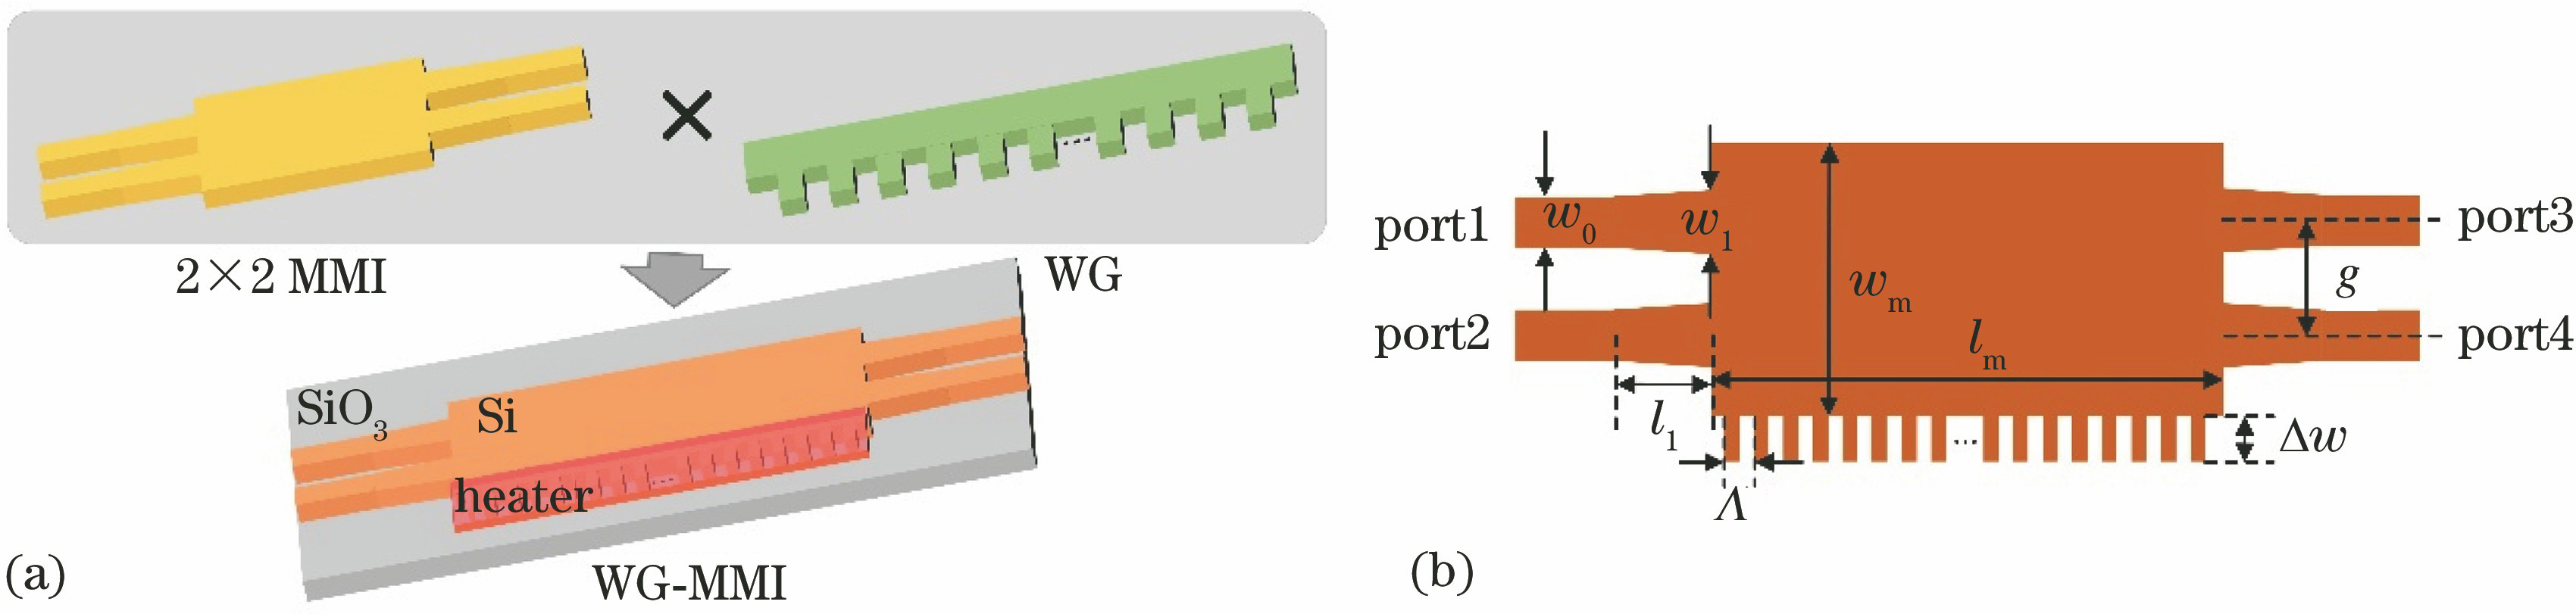 Structure of the WG-MMI type OPS. (a) Three-dimensional schematic diagram; (b) top view and related parameters